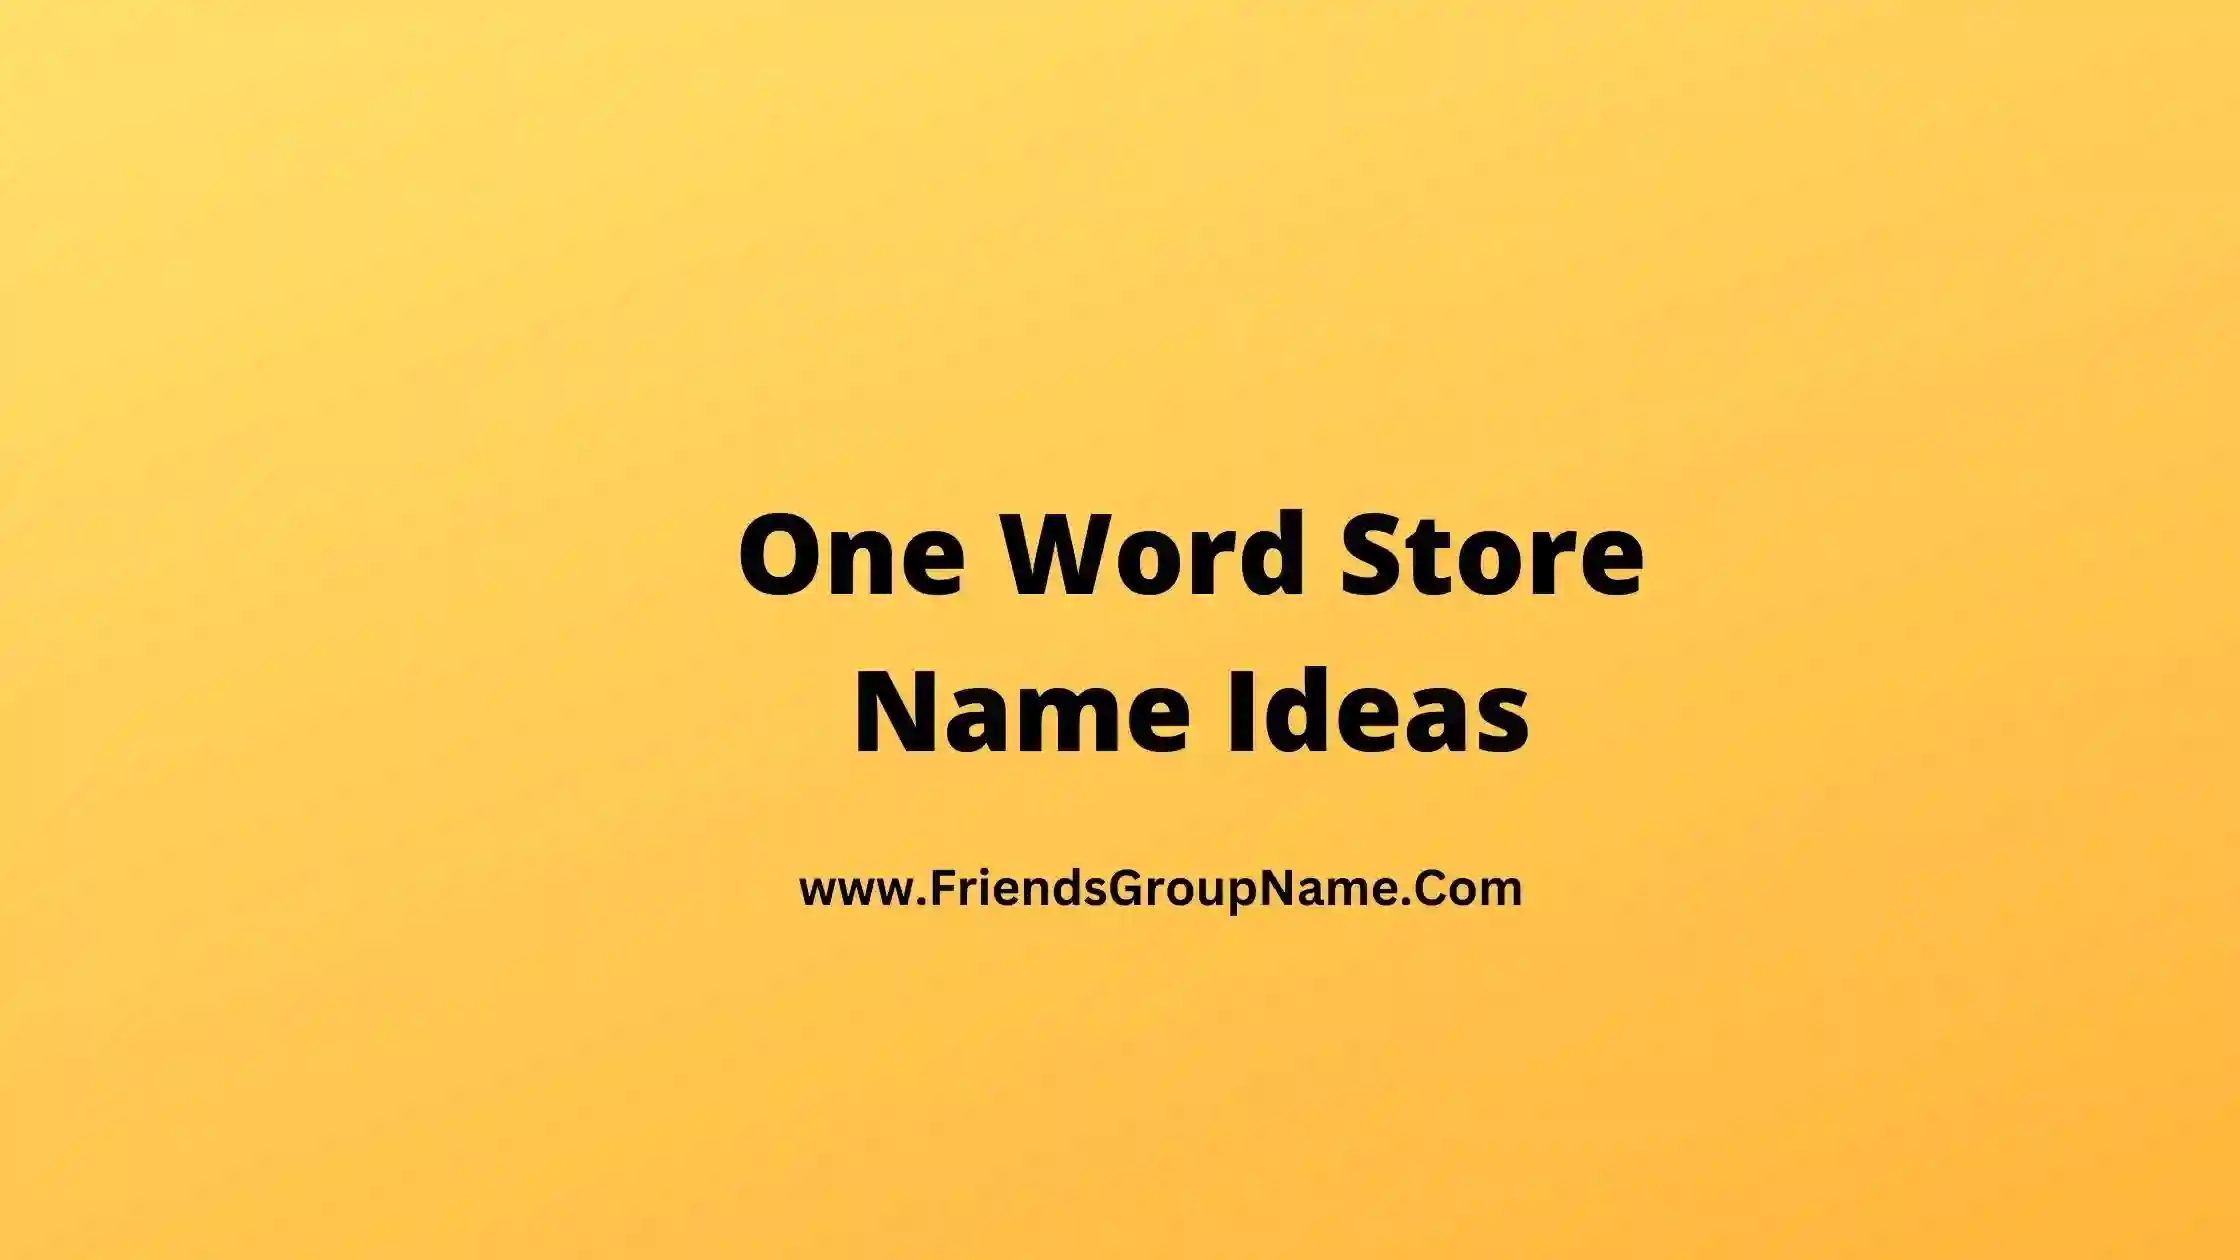 One Word Store Name Ideas